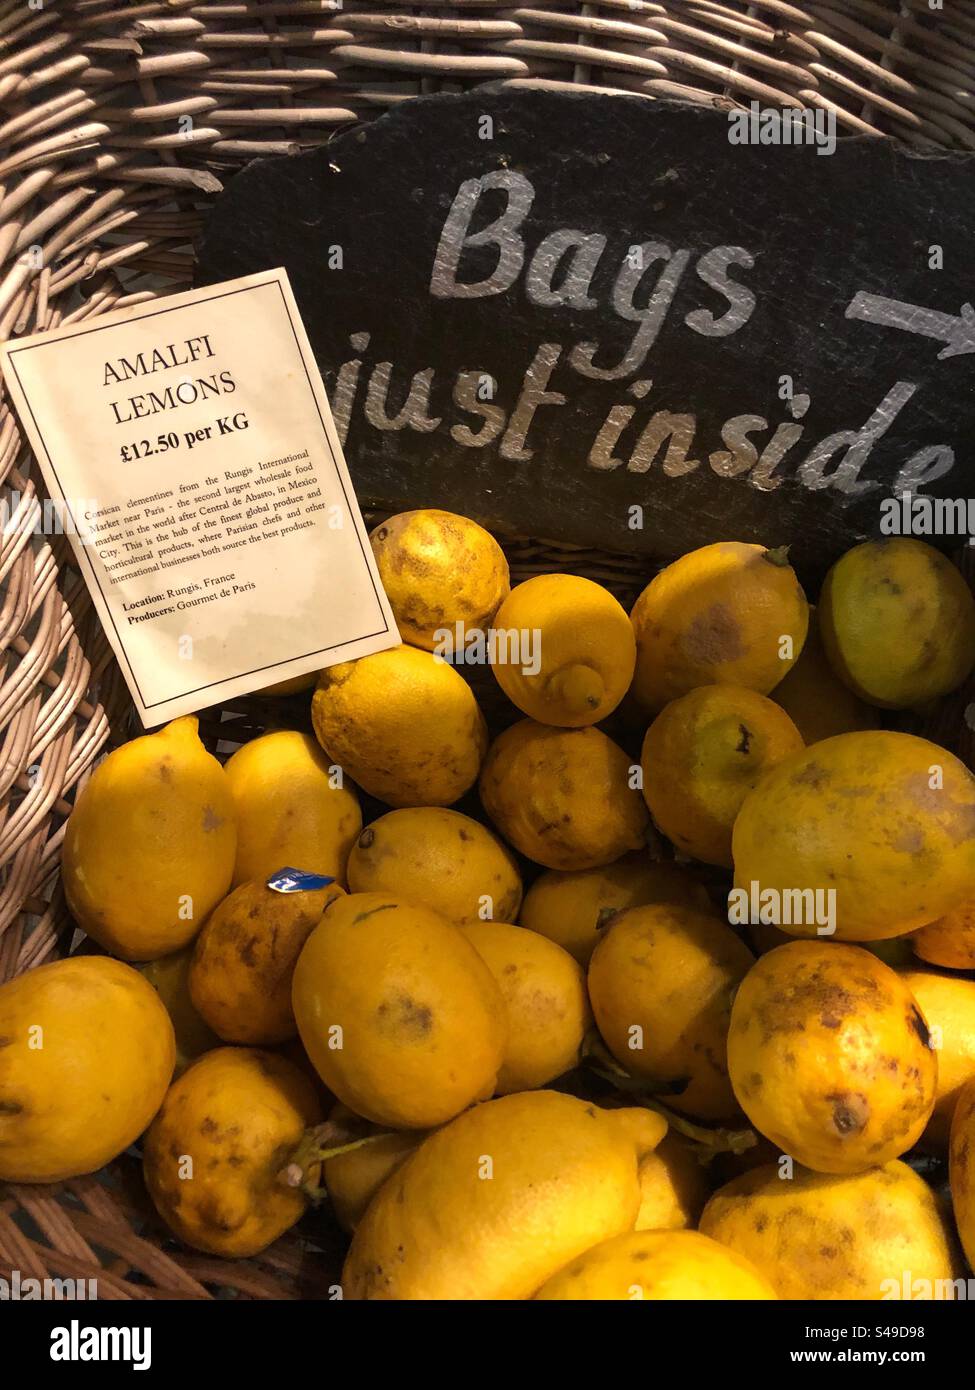 Amalfi lemons priced up for sale at Grocers shop, citrus x limon Stock Photo